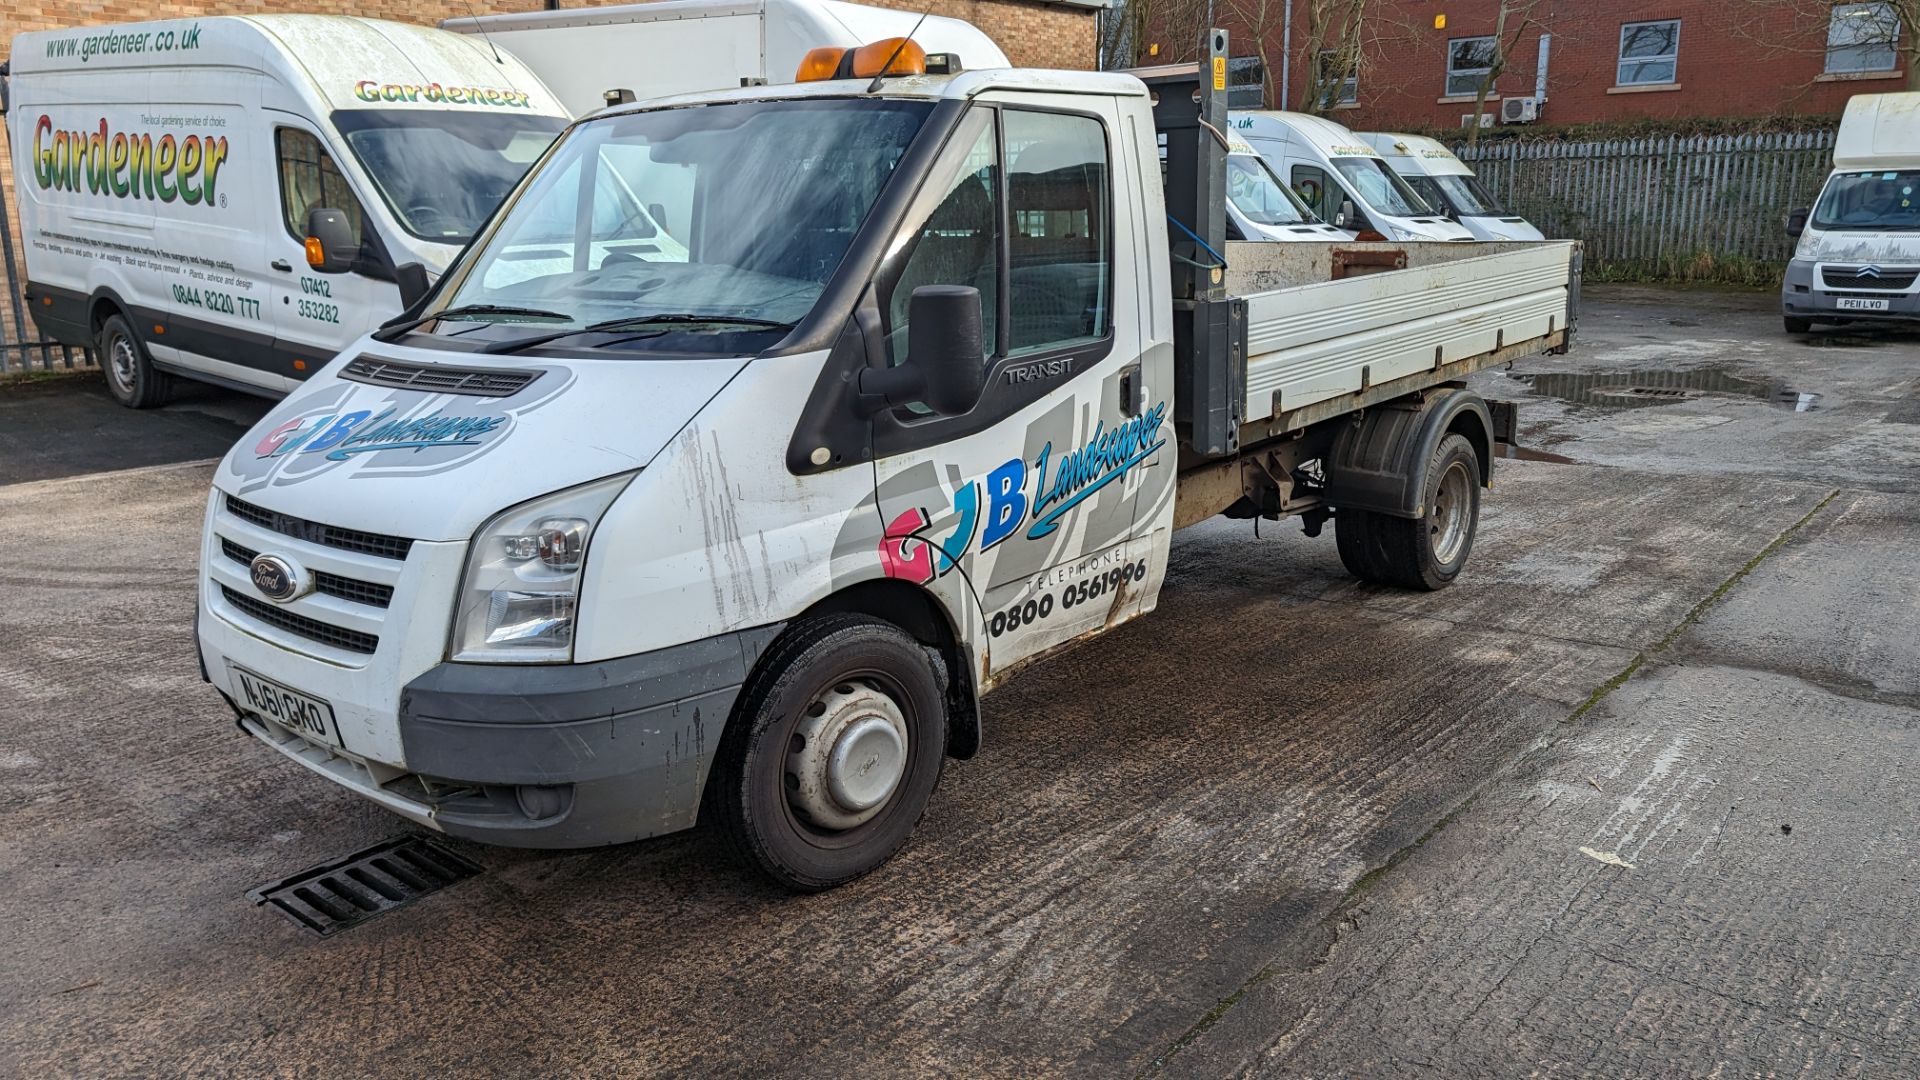 2011 Ford Transit Dropside Tipper - Image 3 of 24